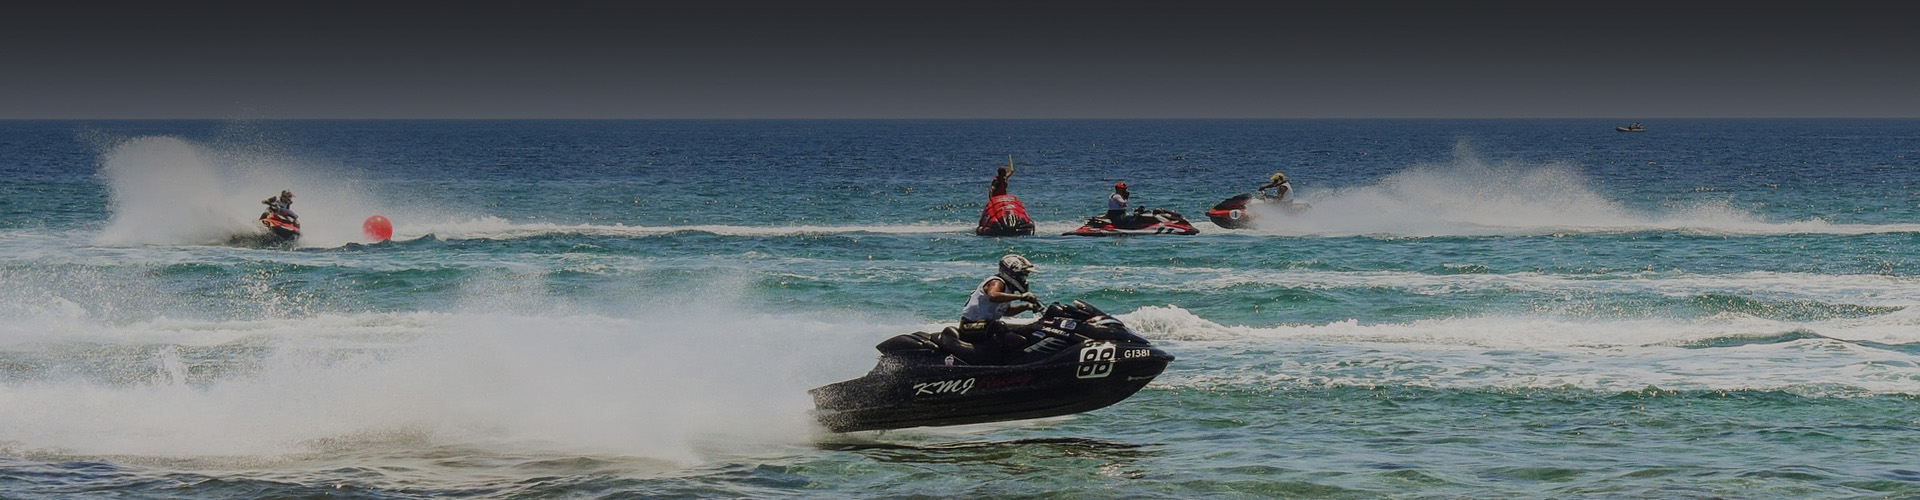 Photo of a person piloting a jet ski on the ocean